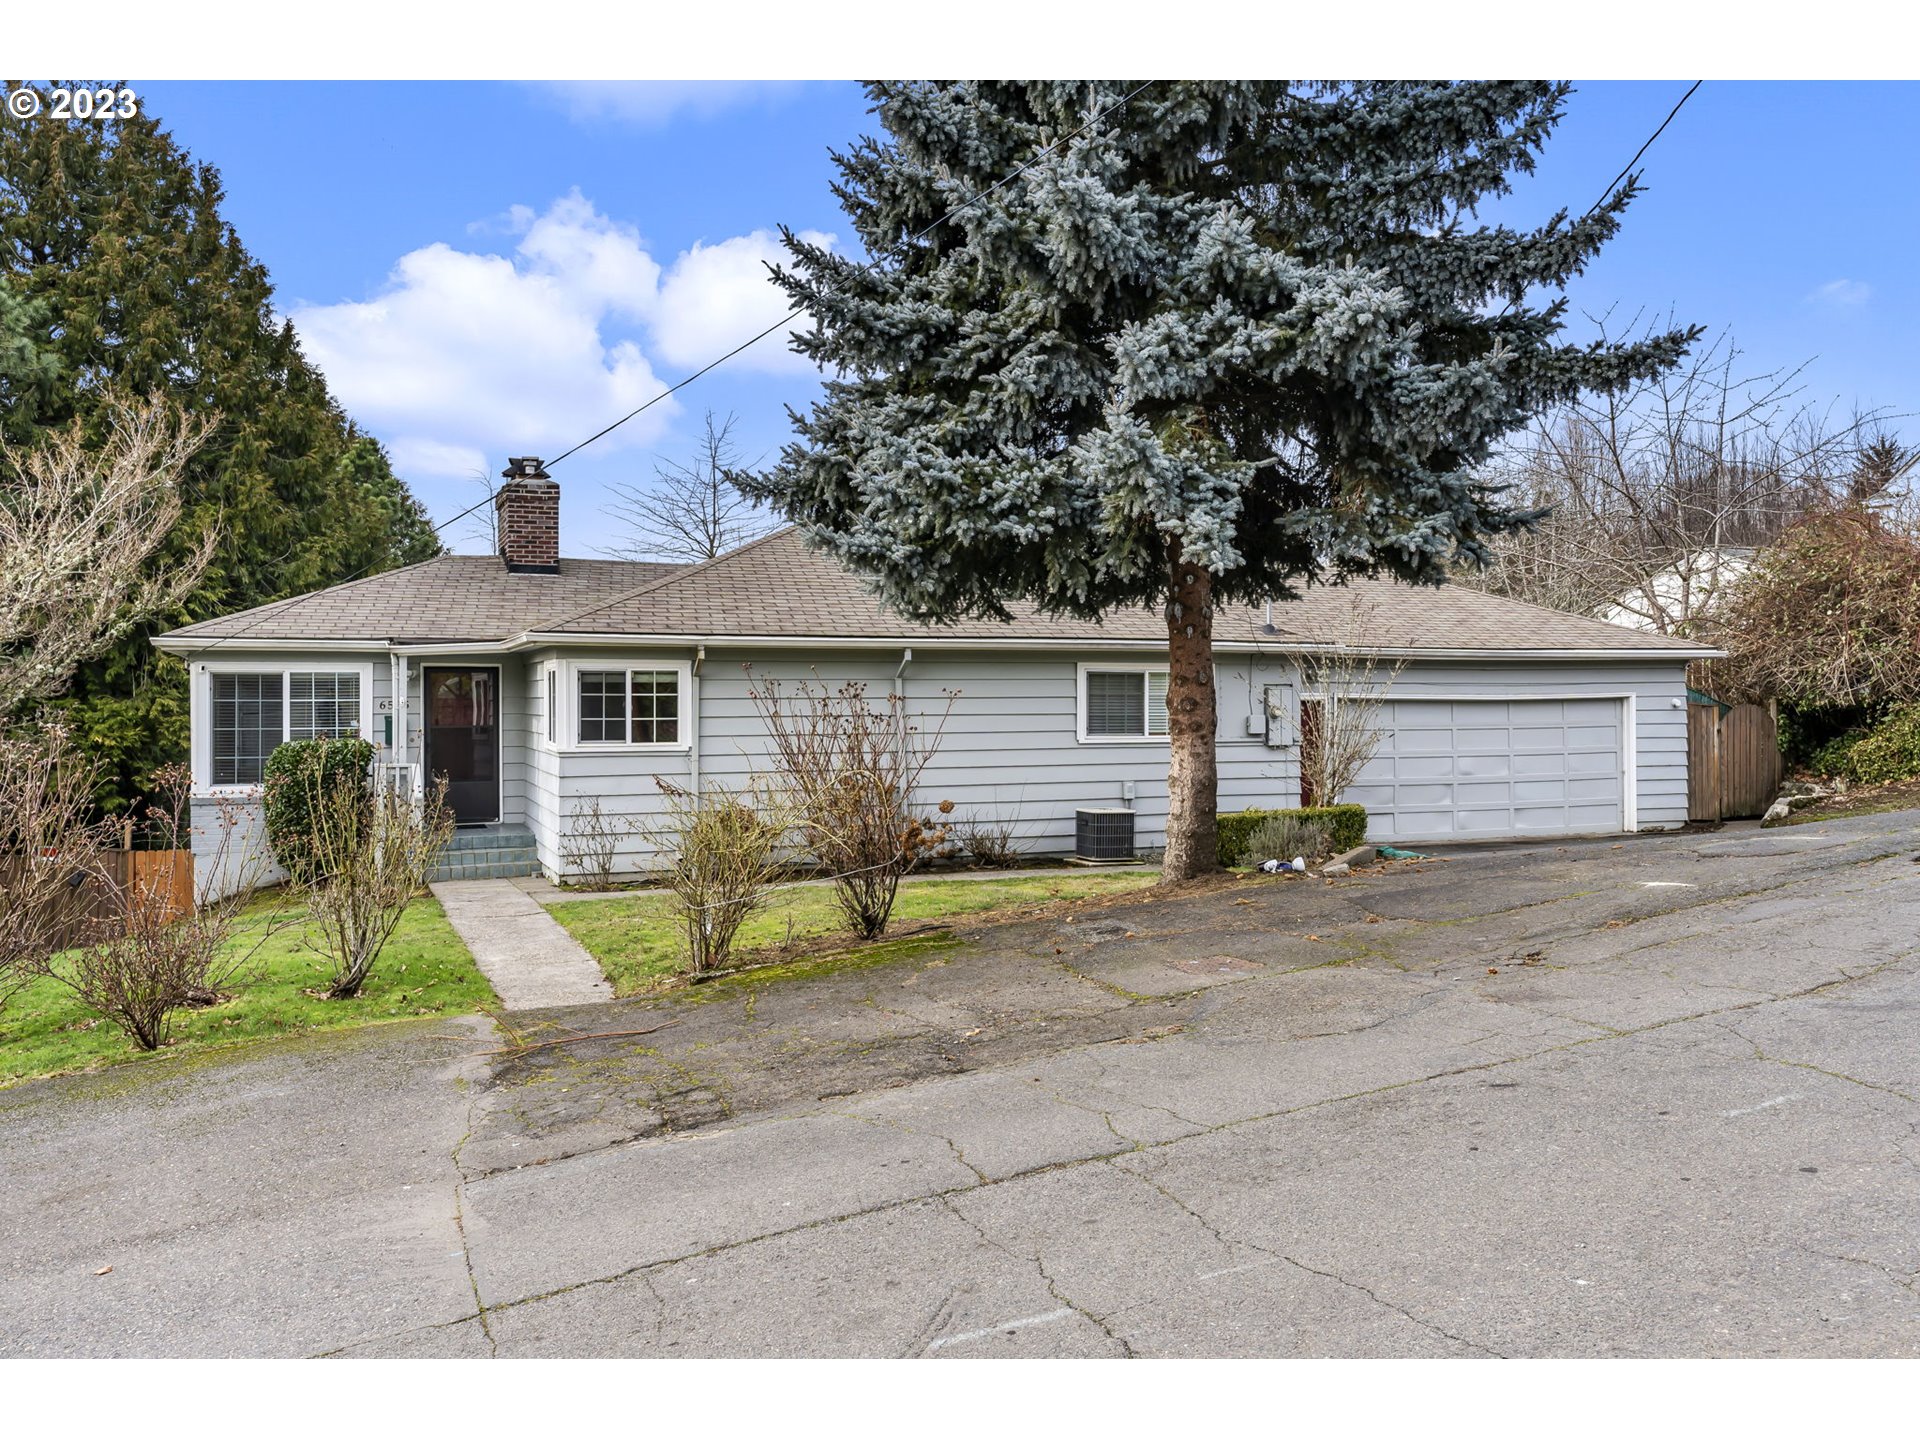 6535 SW 36TH AVE, Portland, OR 97221